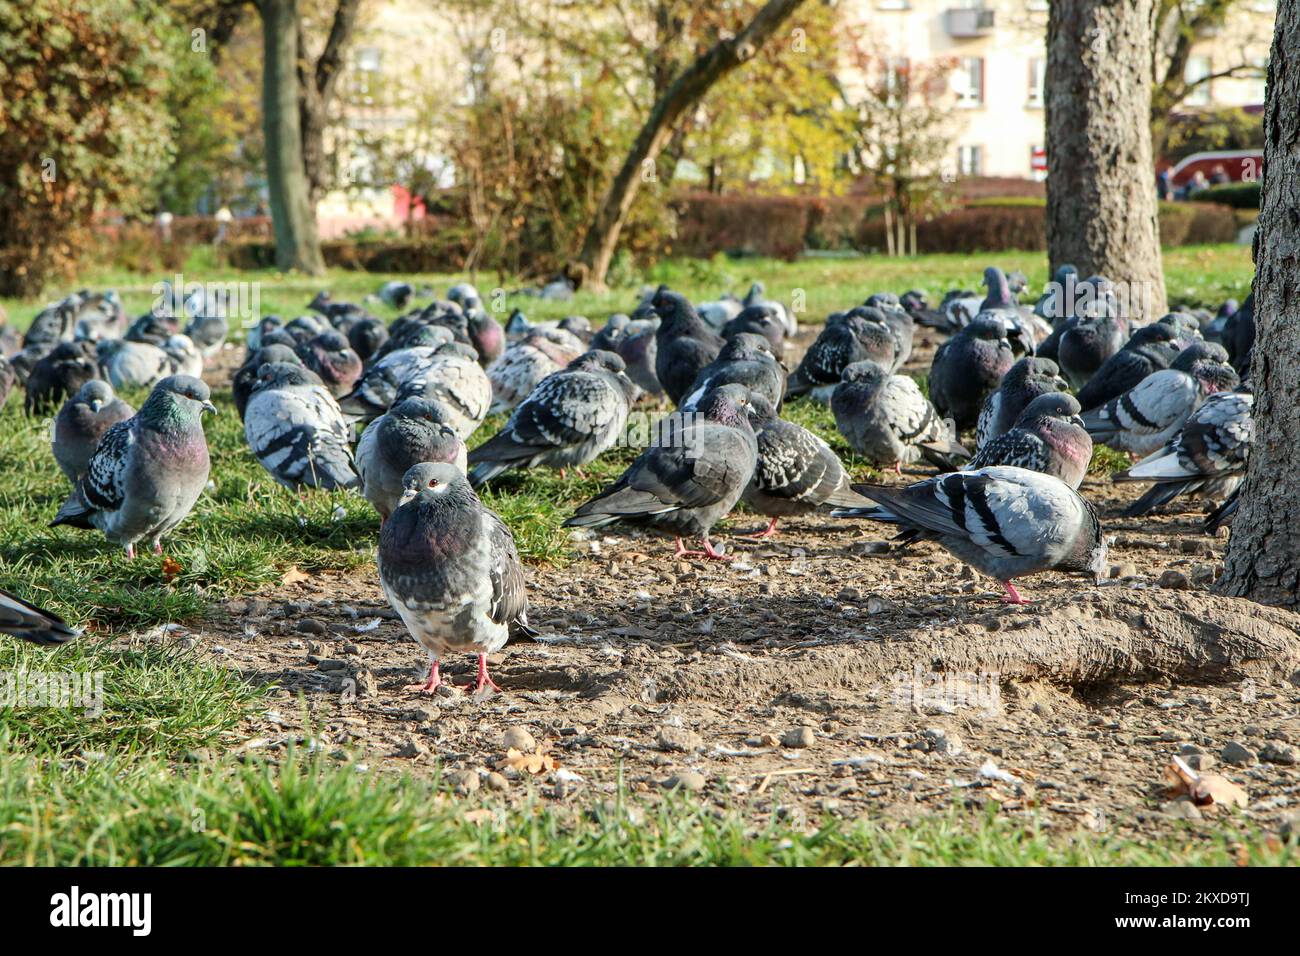 The big group of pigeons nesting on the ground under the trees in the city center. Stock Photo